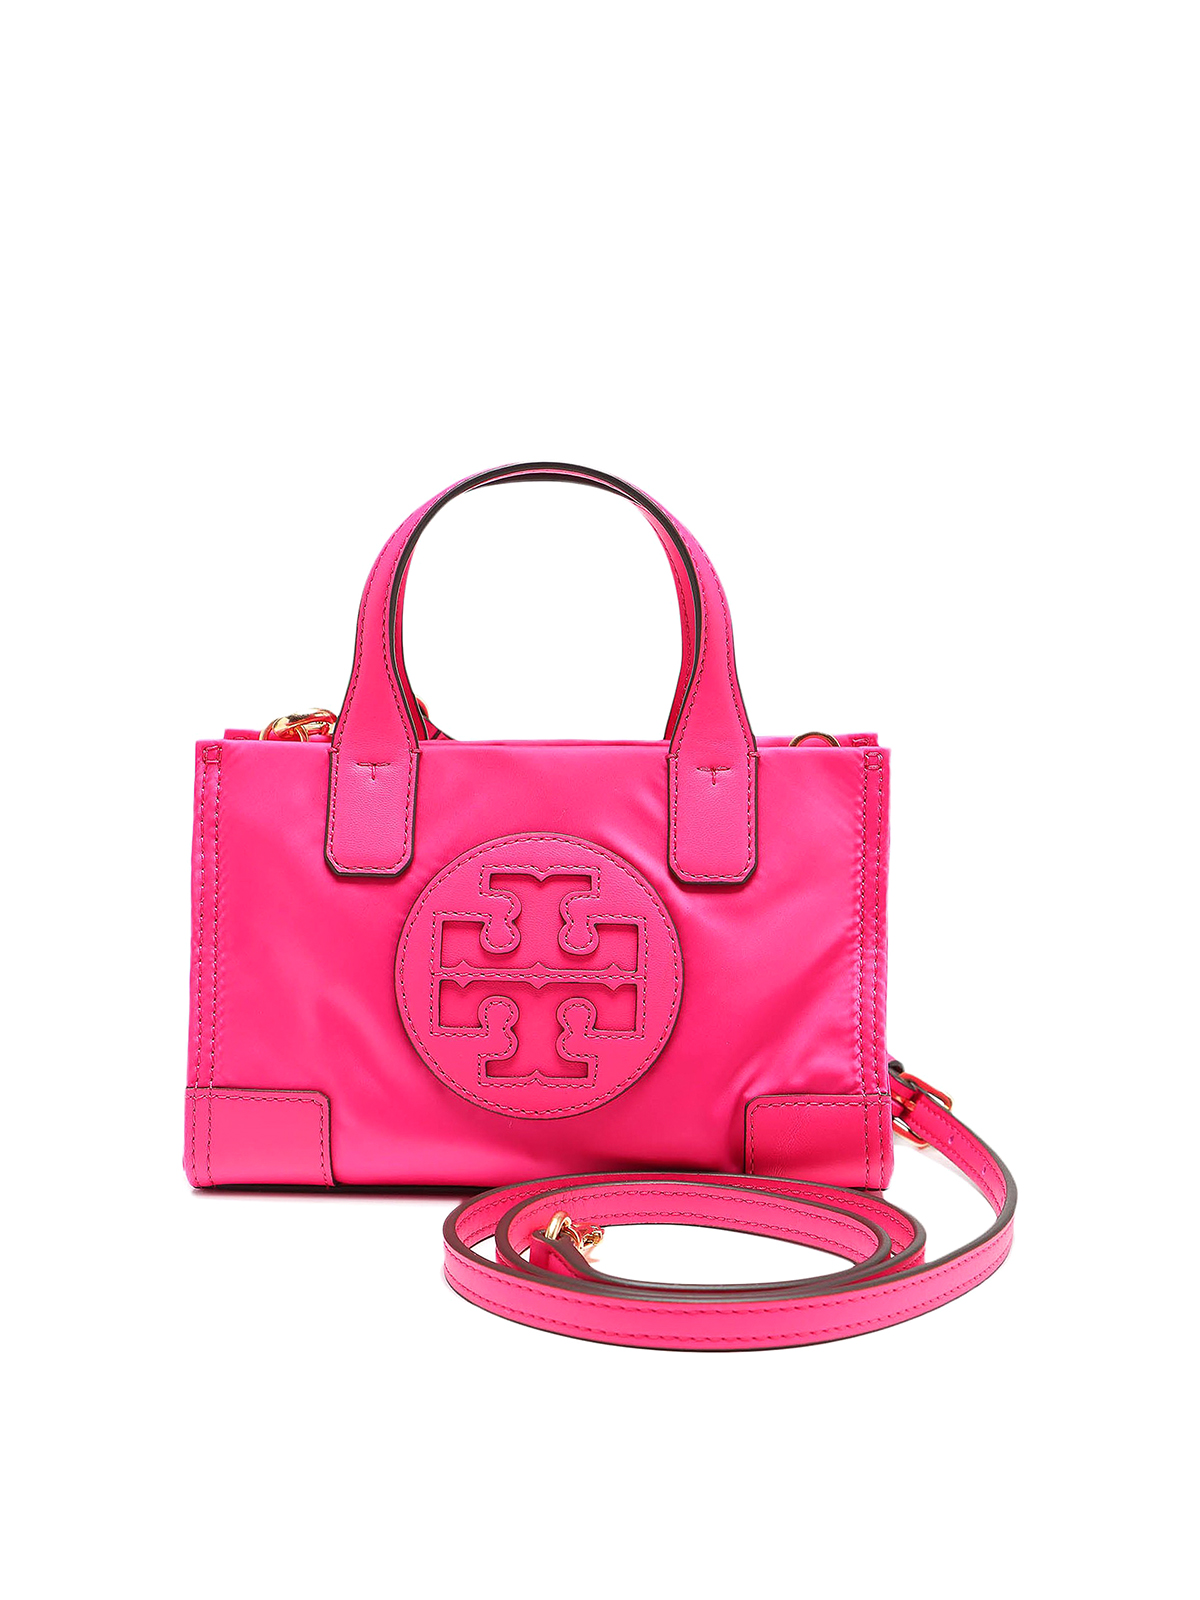 Tory Burch York Saffiano Leather Tote - Light Pink - $139 - From Emily